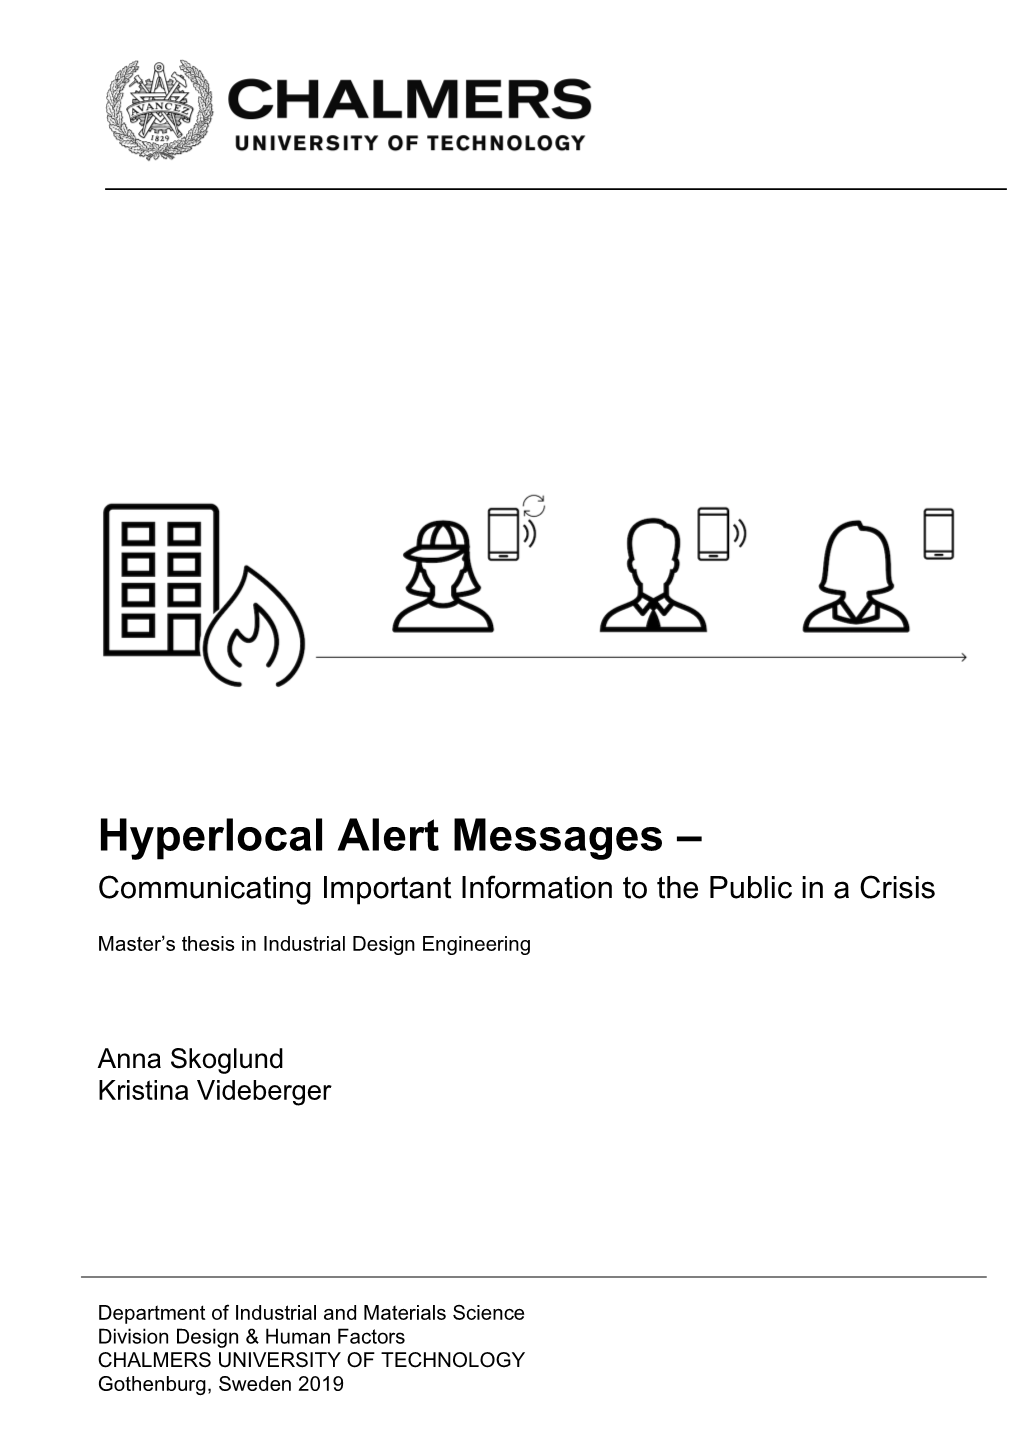 Hyperlocal Alert Messages – Communicating Important Information to the Public in a Crisis